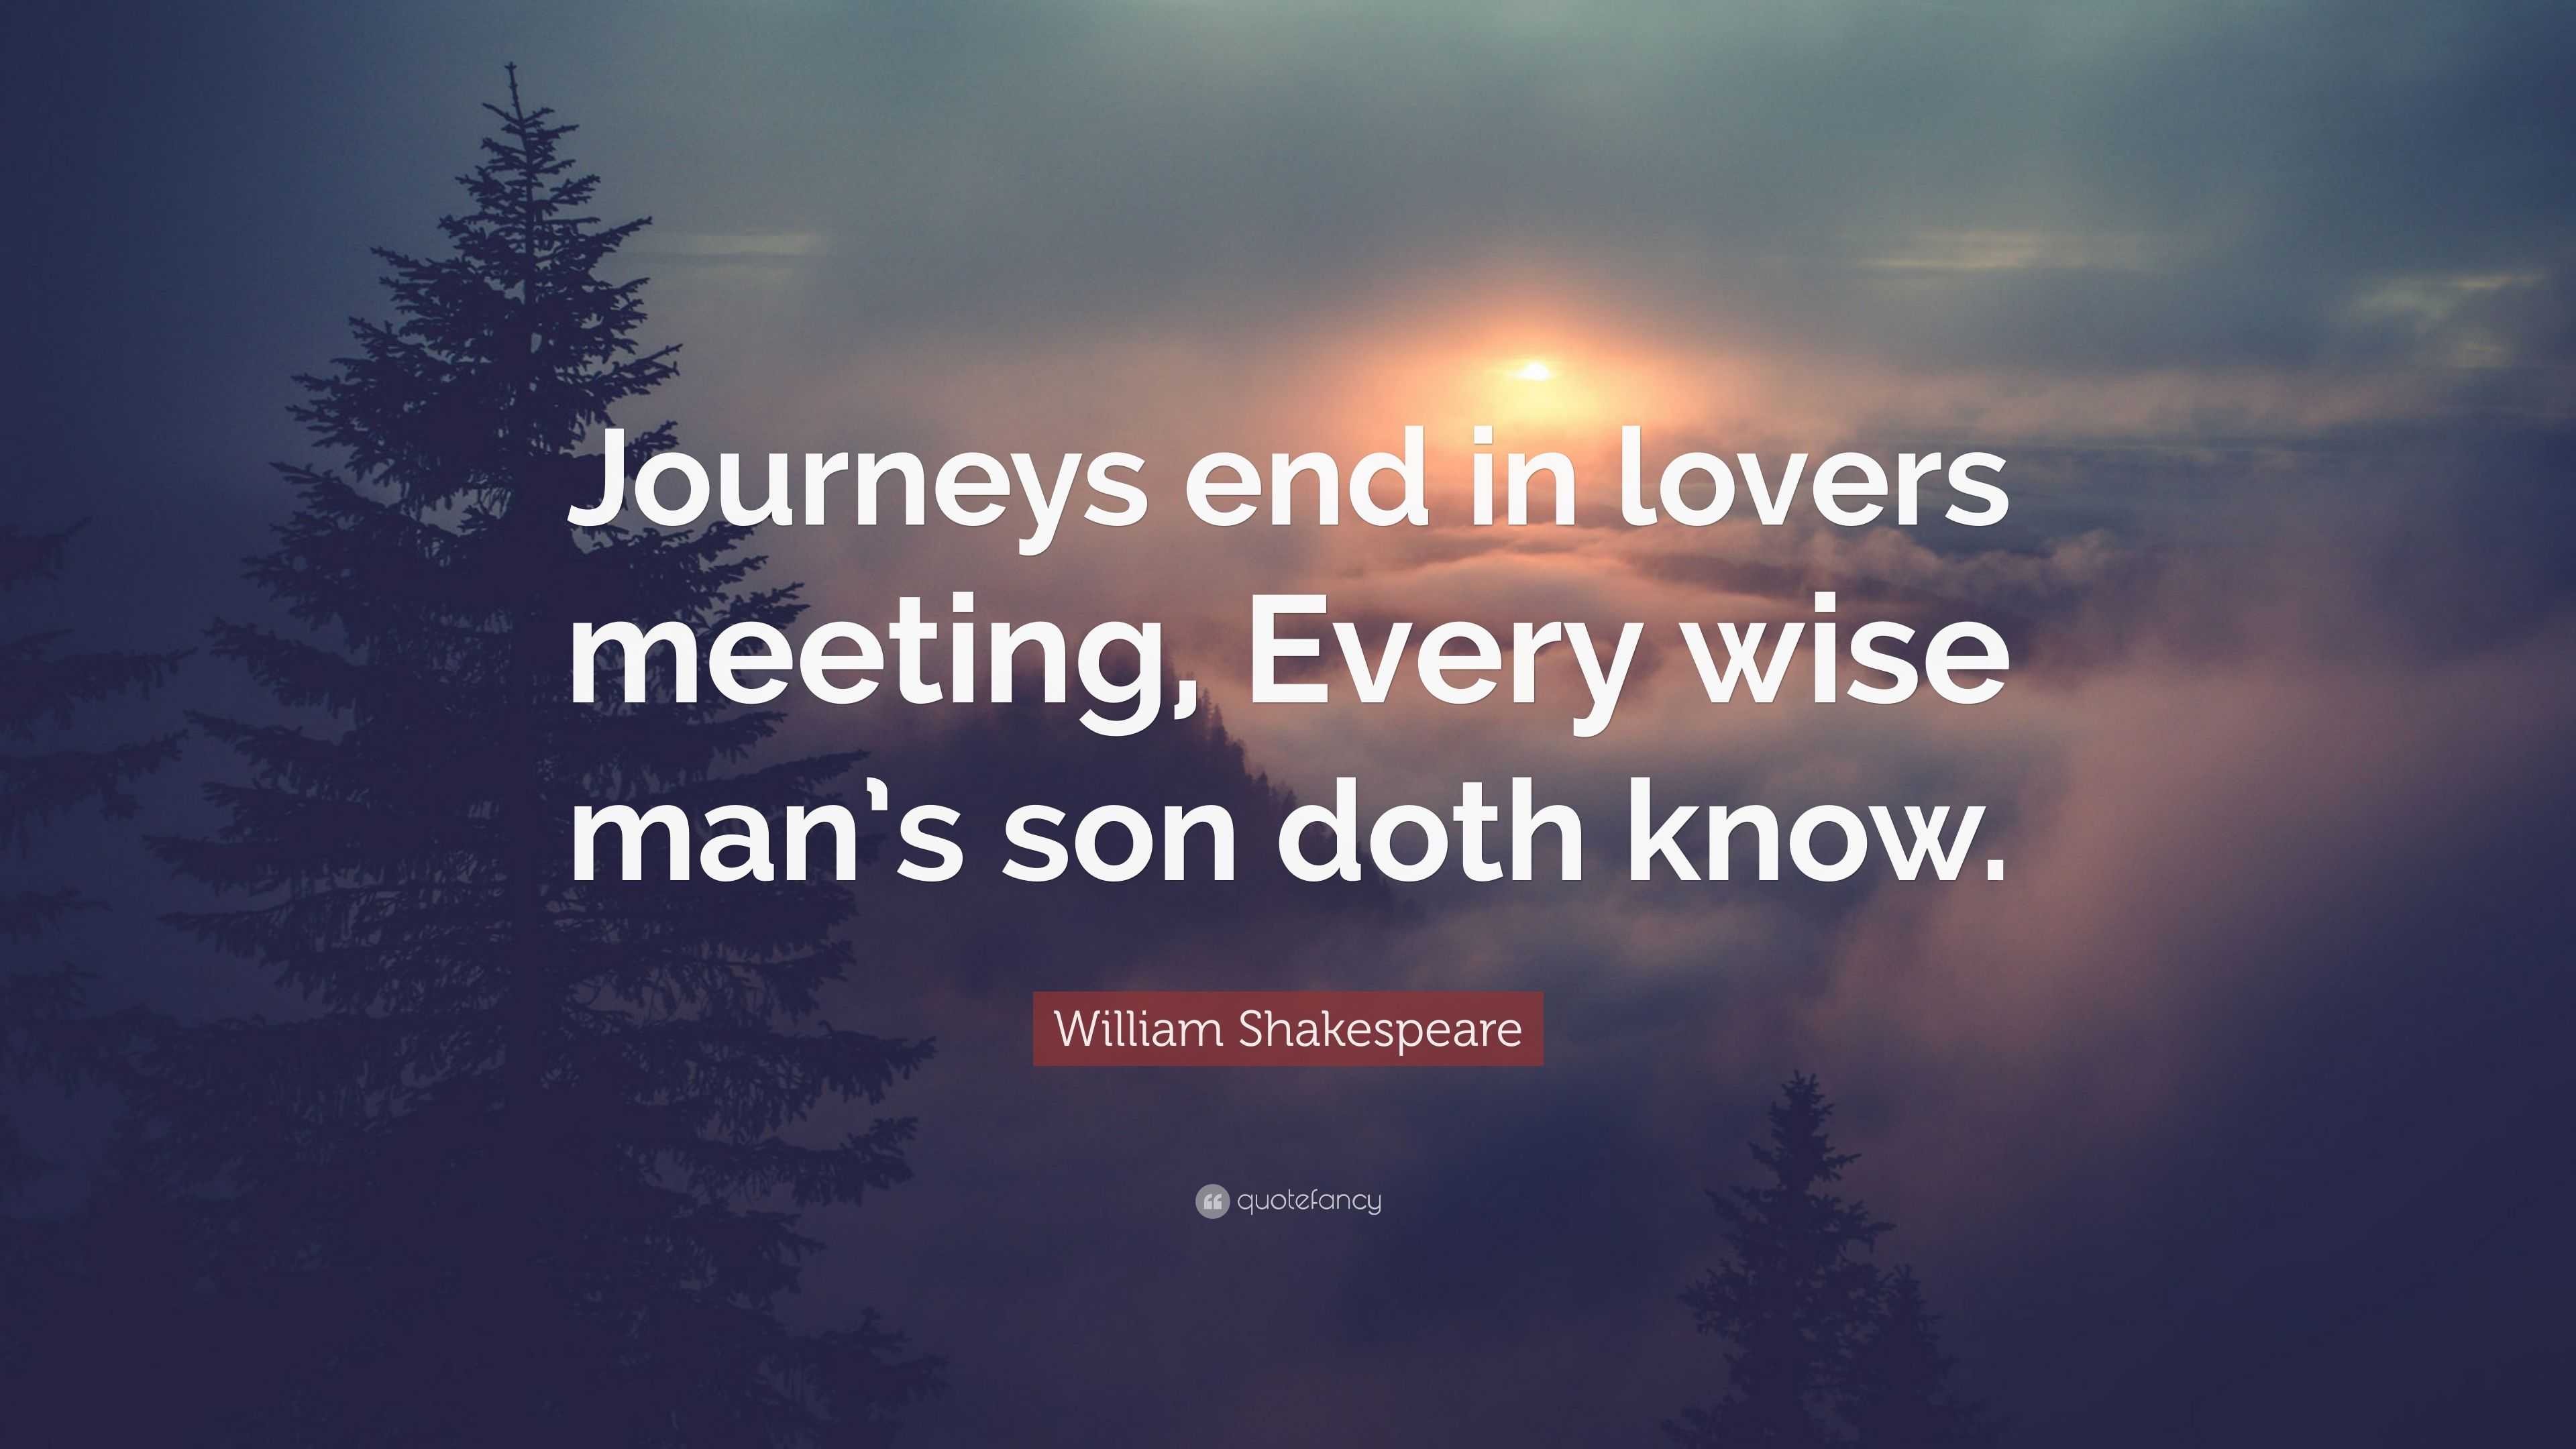 journey ends in lovers meeting